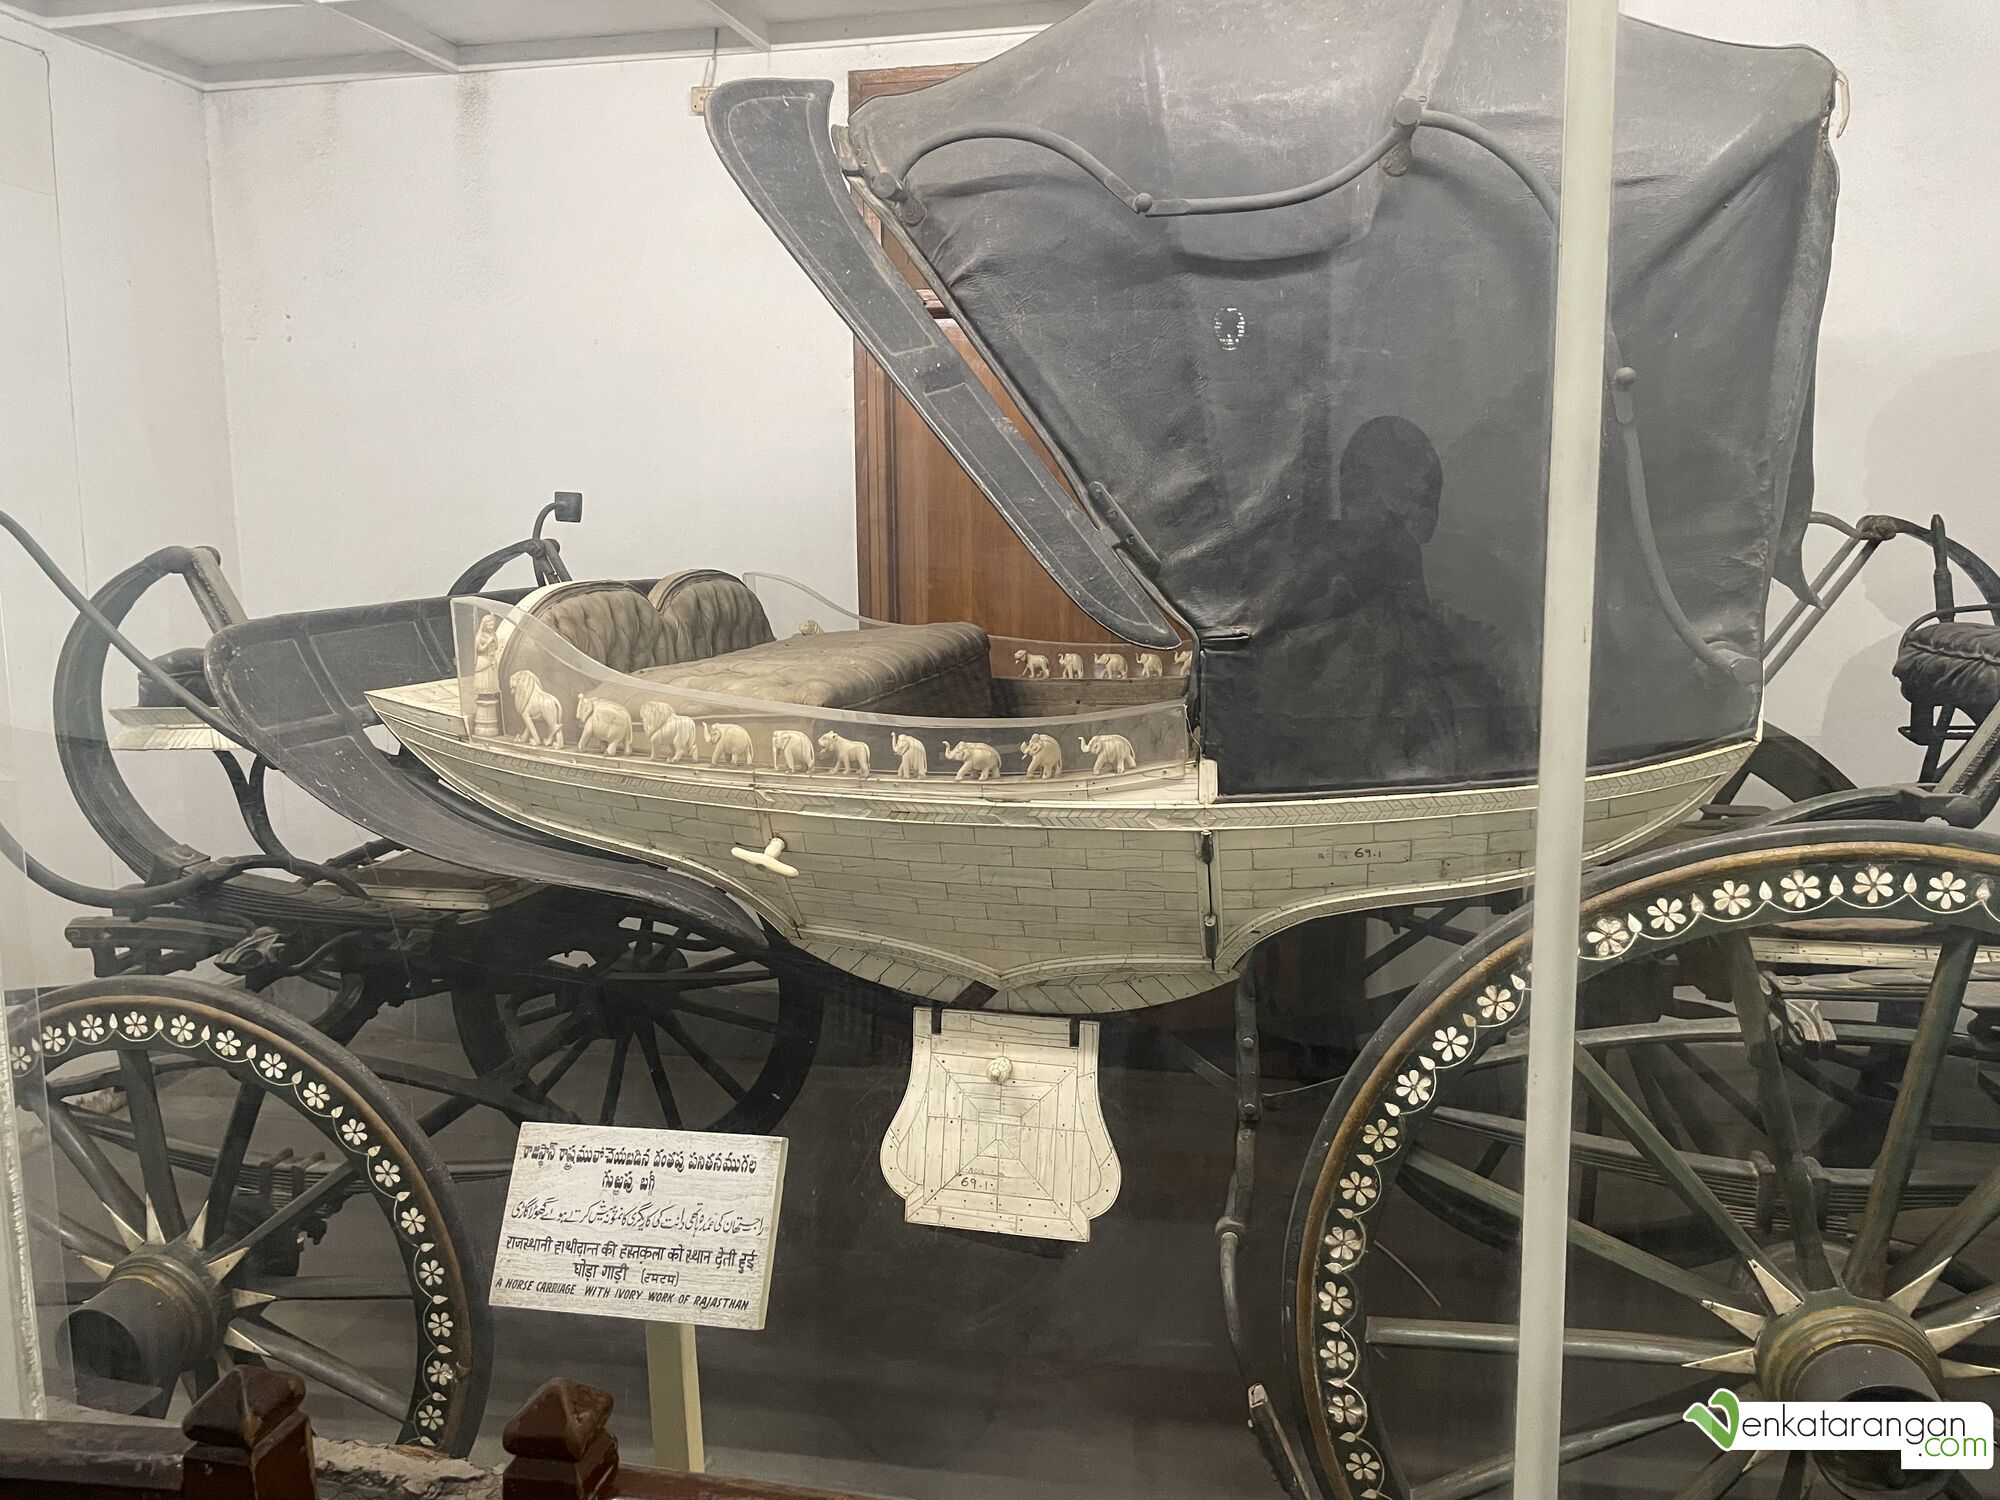 The Ivory carved horse carriage gifted by the first President of India Dr Rajendra Prasad to the museum